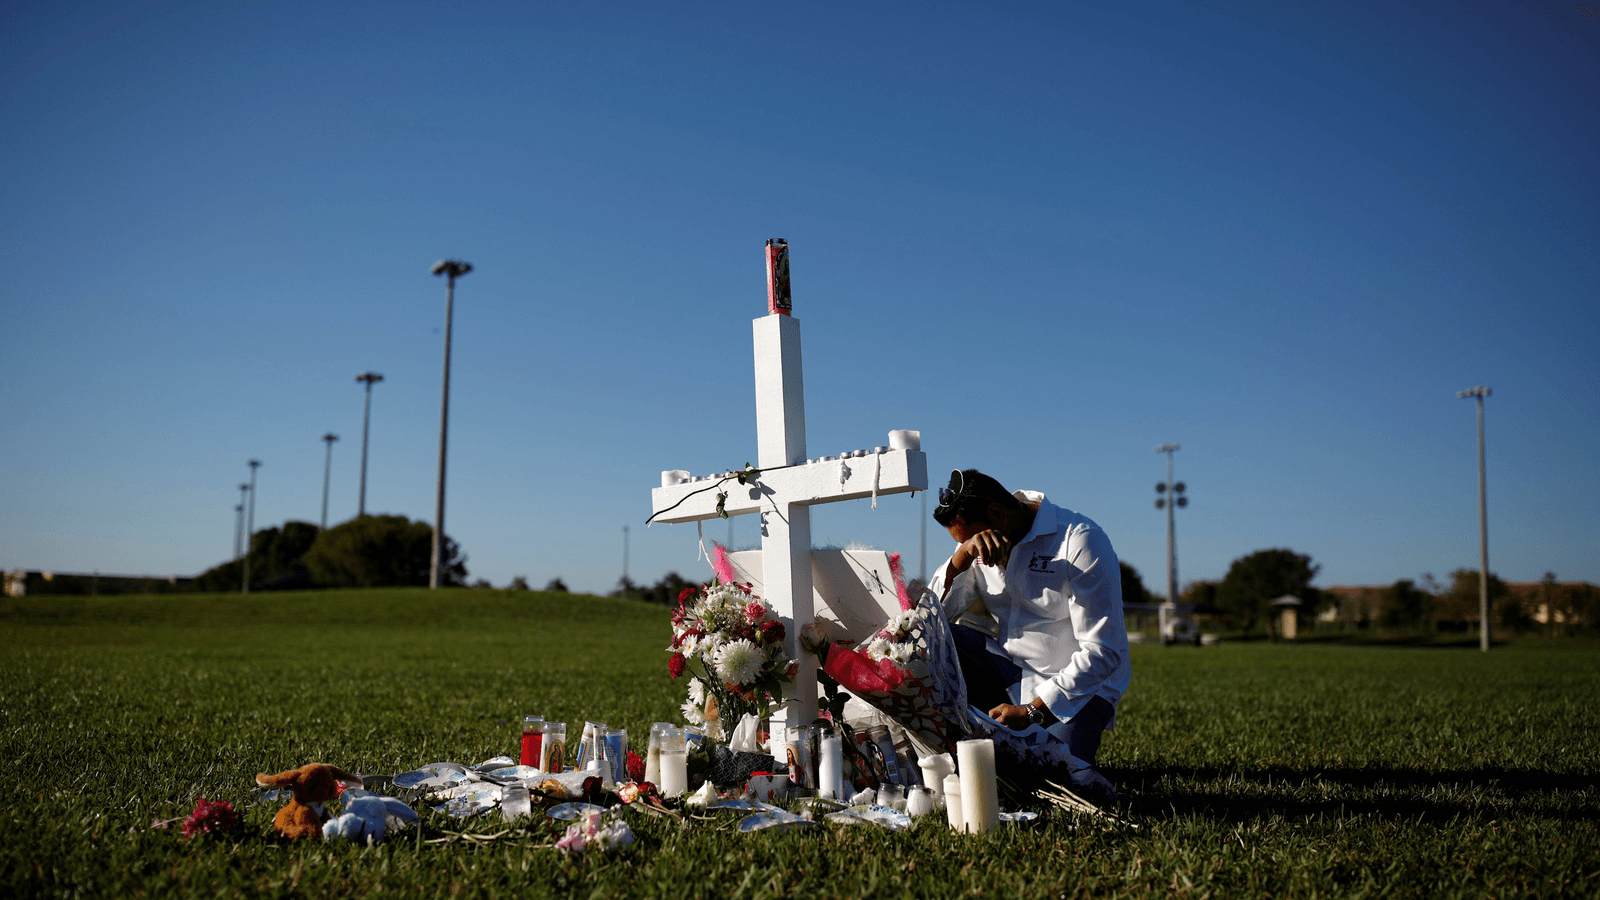 Joe Zevuloni mourns in front of a cross placed in a park to commemorate the victims of the shooting at Marjory Stoneman Douglas High School, in Parkland, Florida, Feb. 16, 2018.